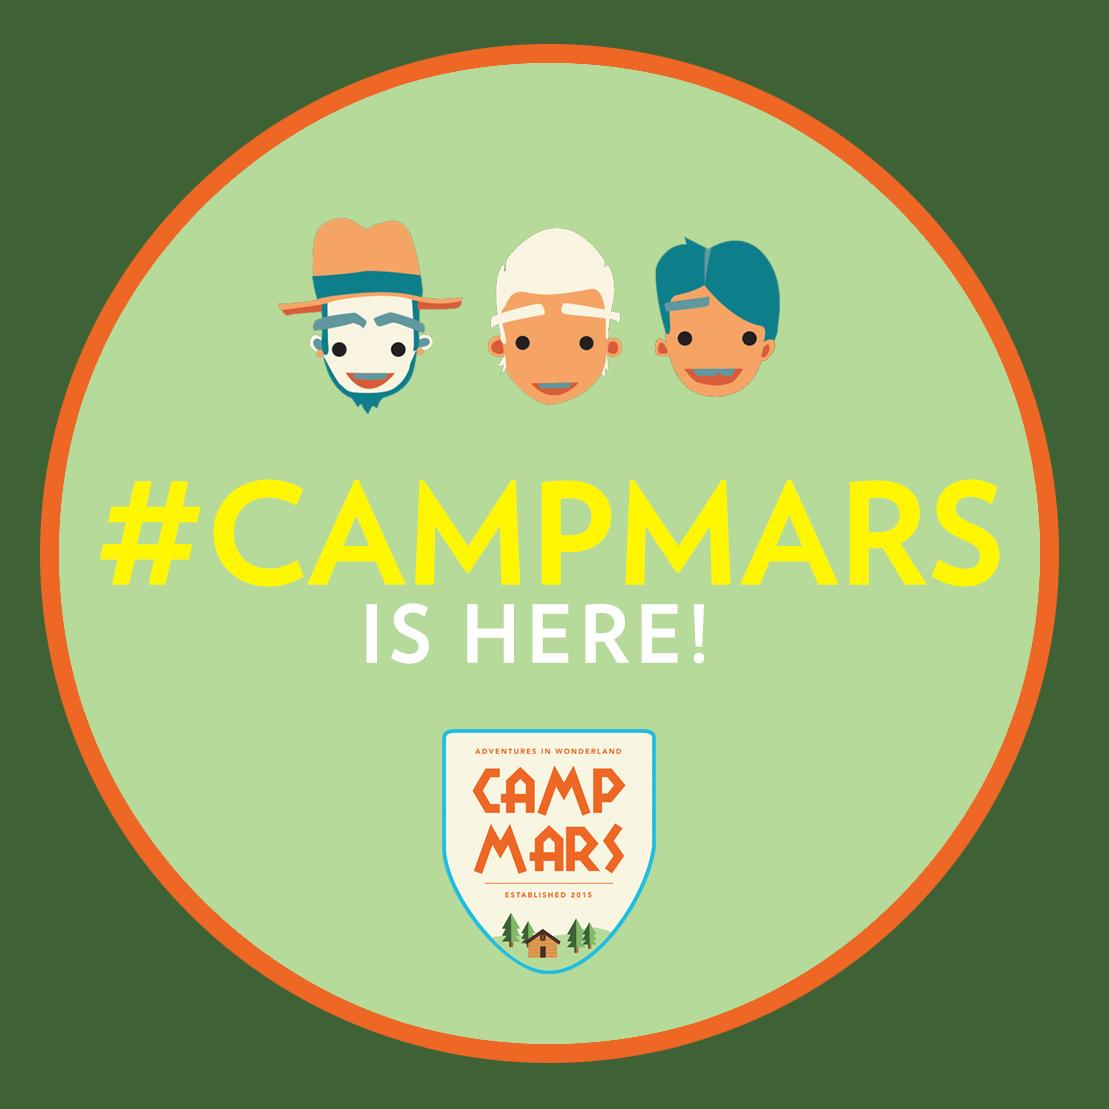 Today, today, today!! #CampMars http://t.co/CceqN23NmC